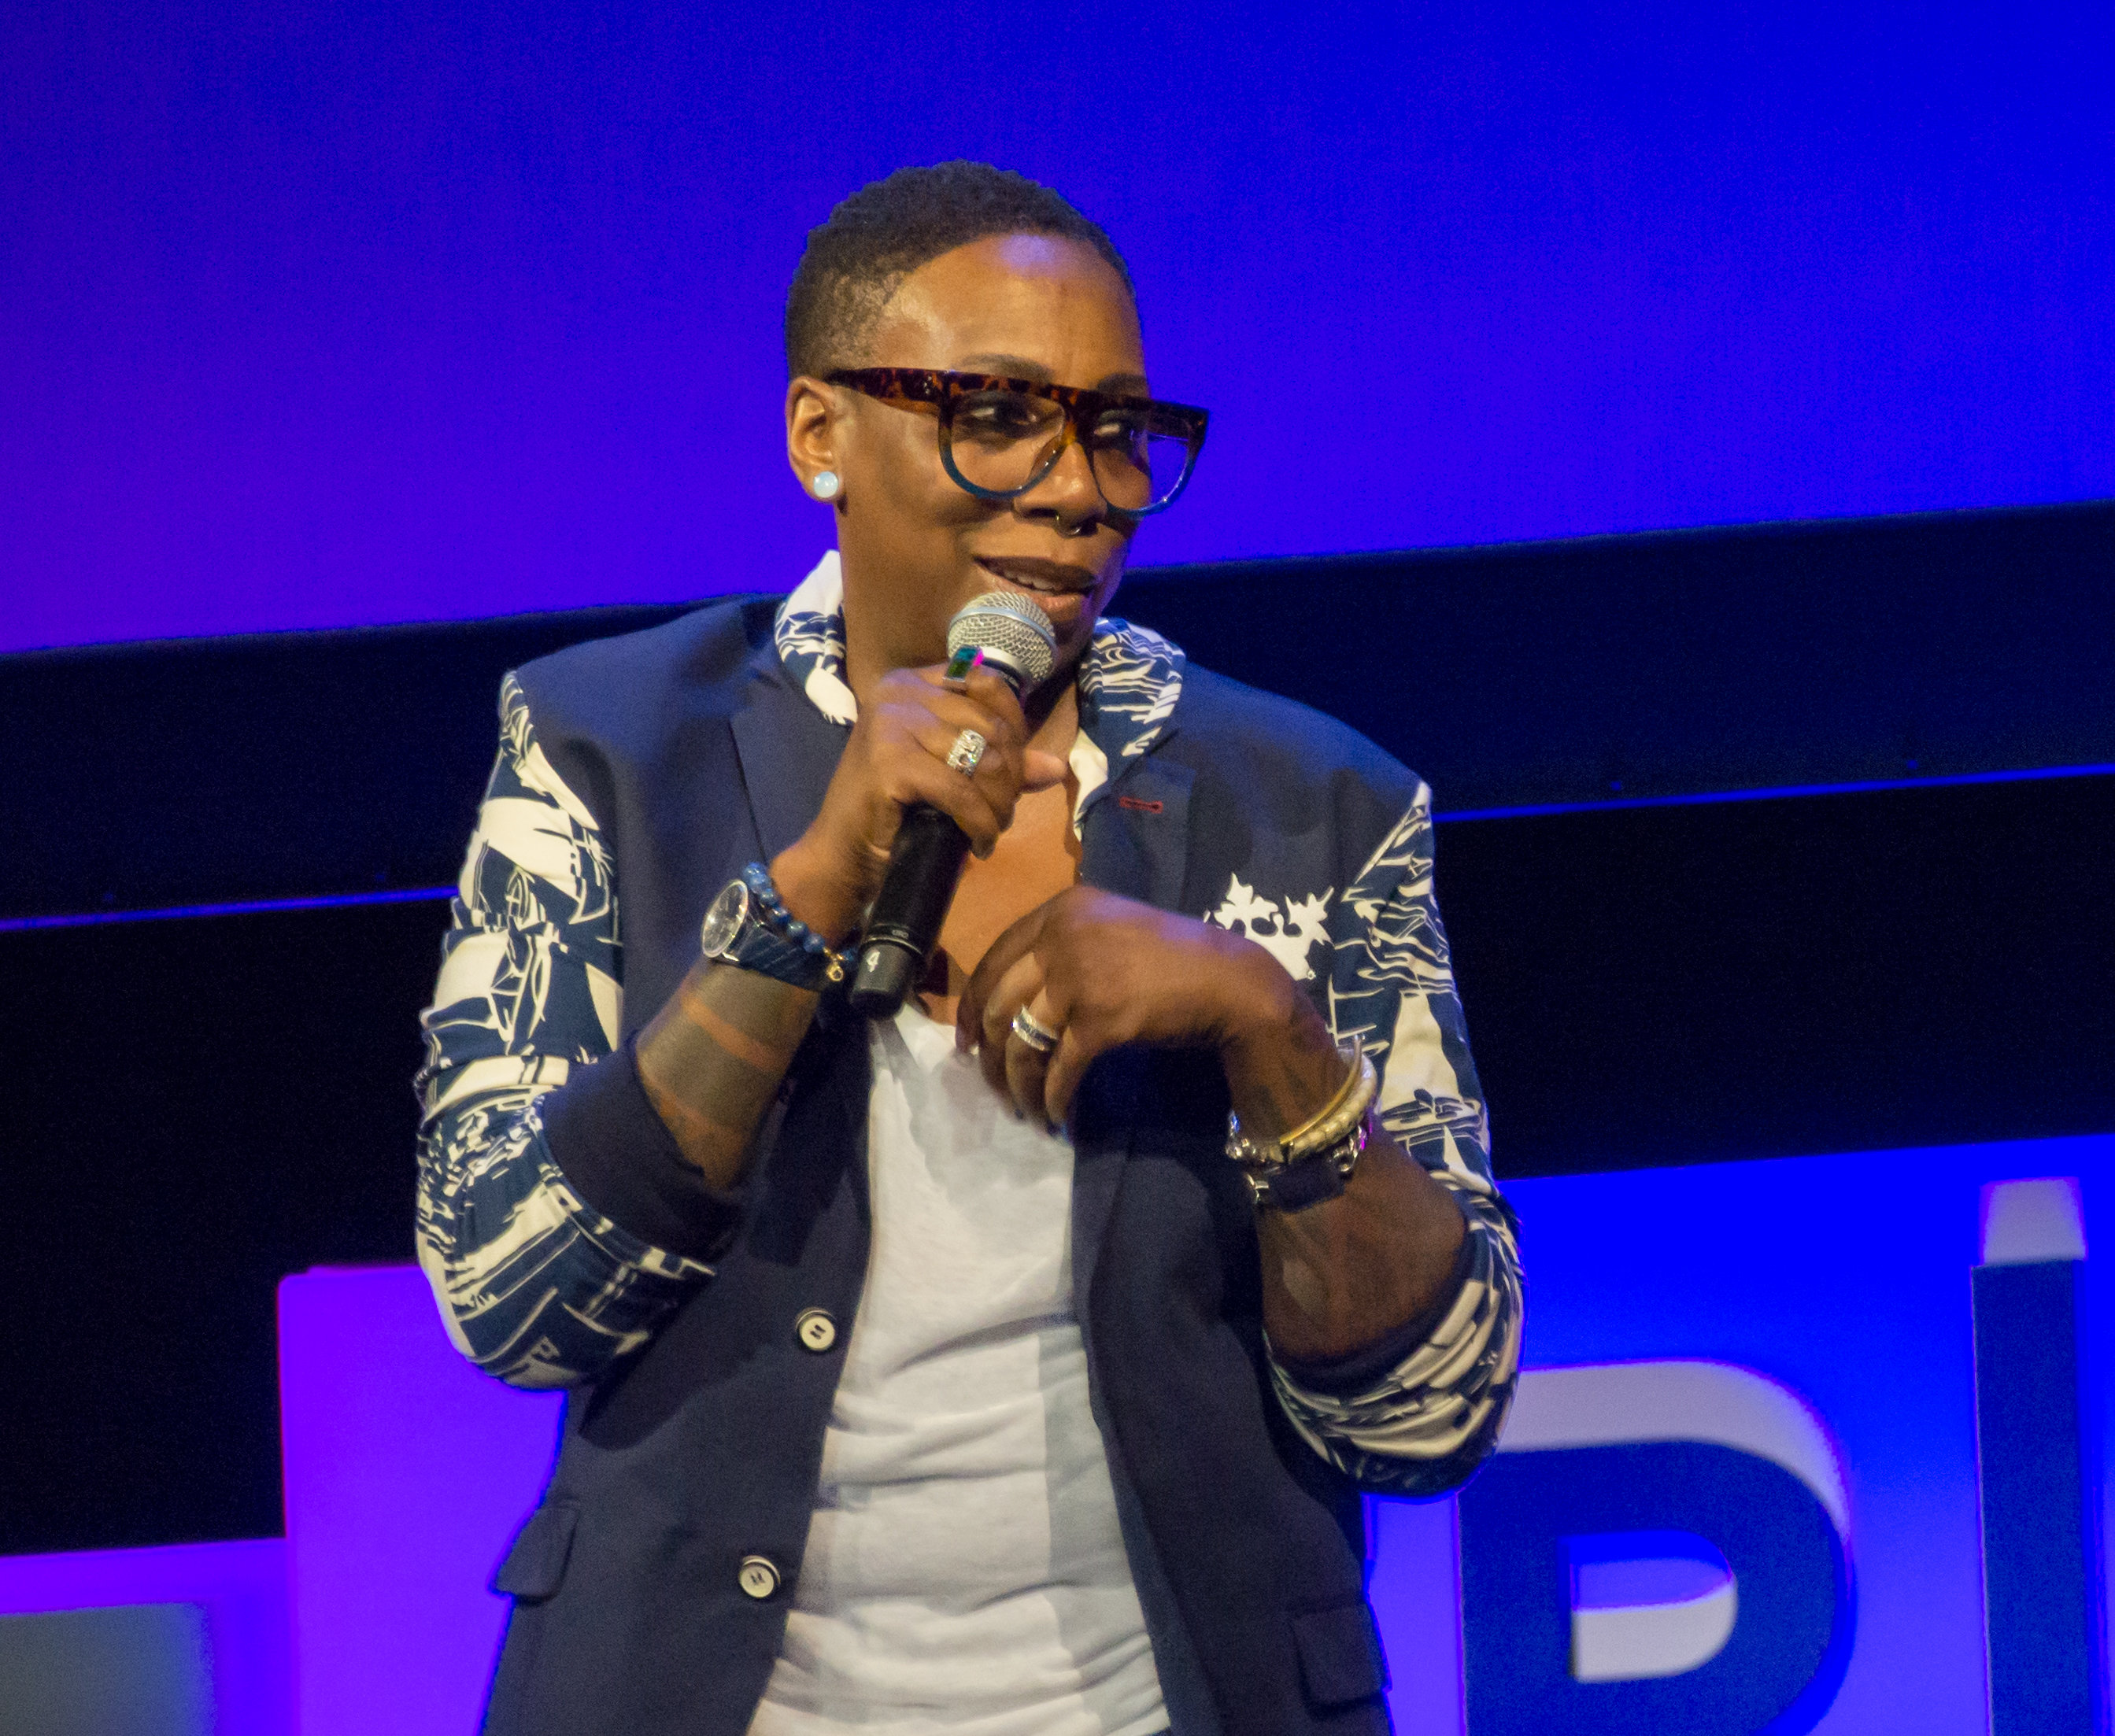 Yashere at the [[Tribeca Film Festival]] in 2018